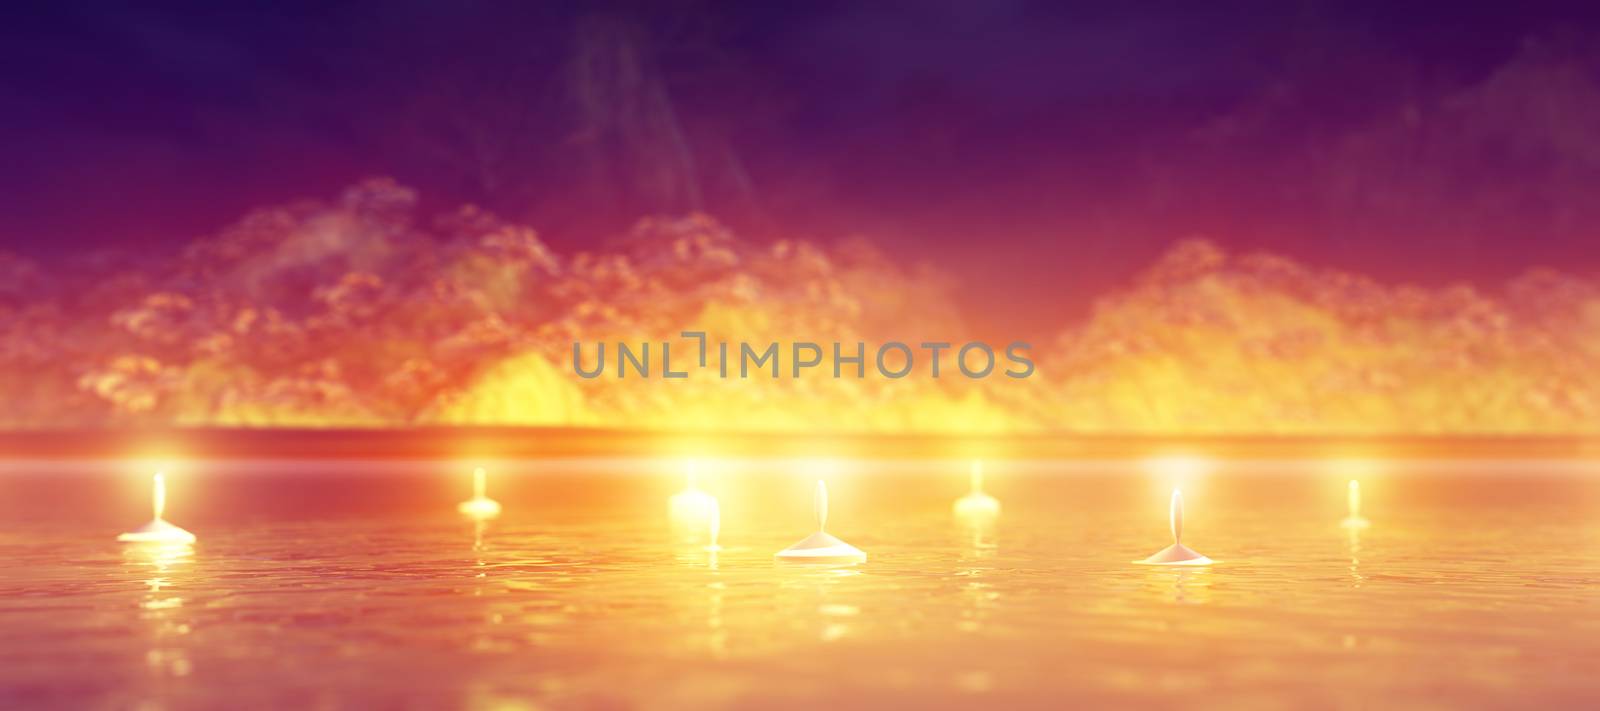 Abstract night background with candles in the water by alex_nako